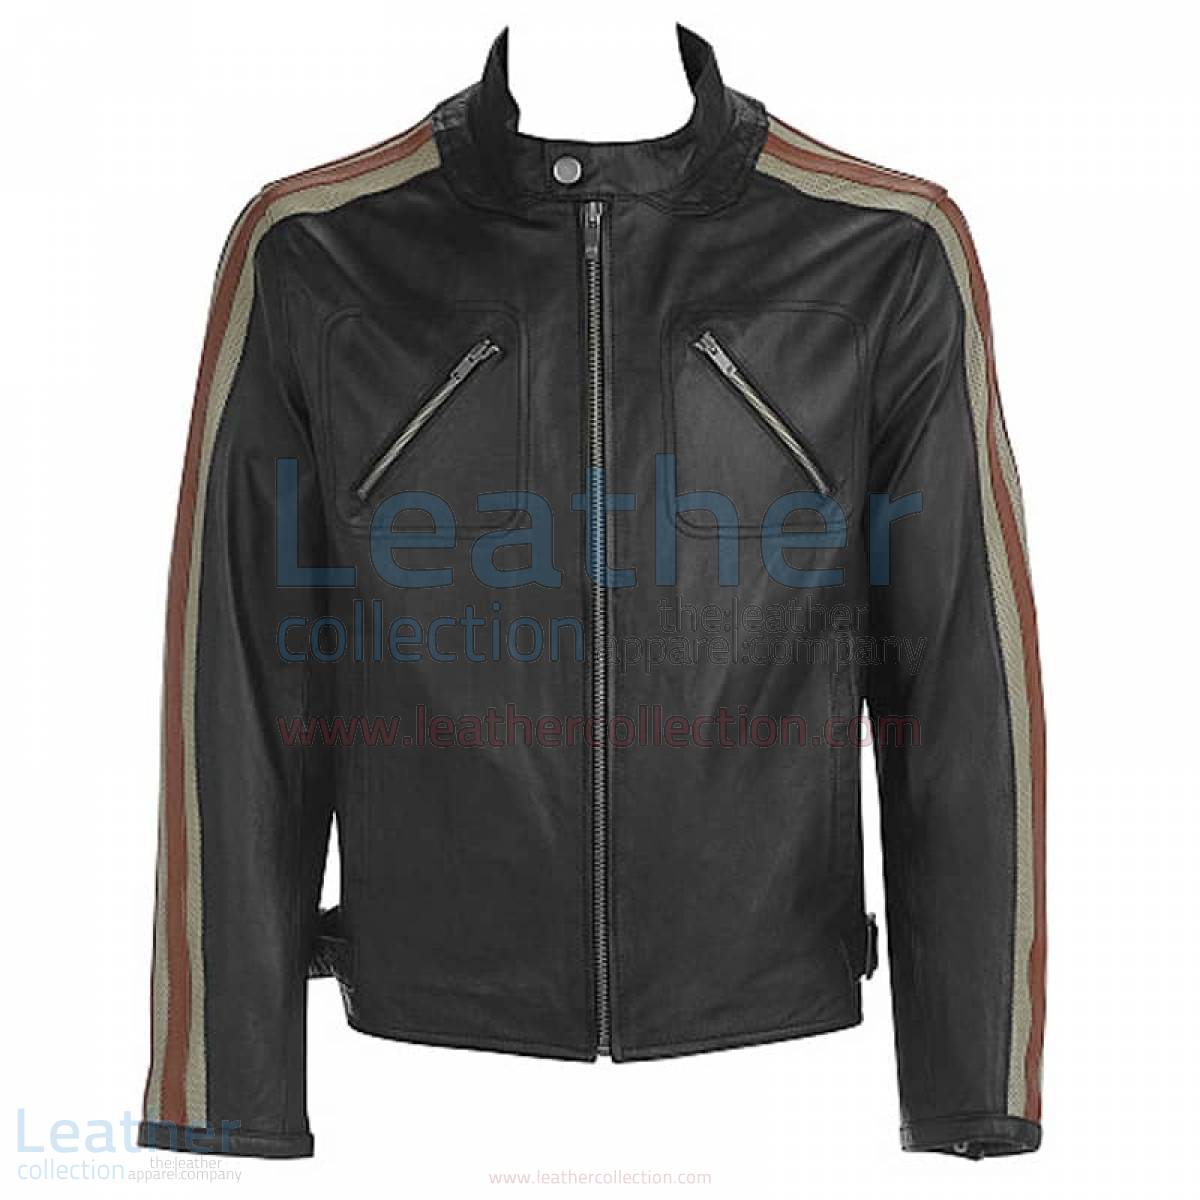 Leather Jacket With Stripes on Sleeves